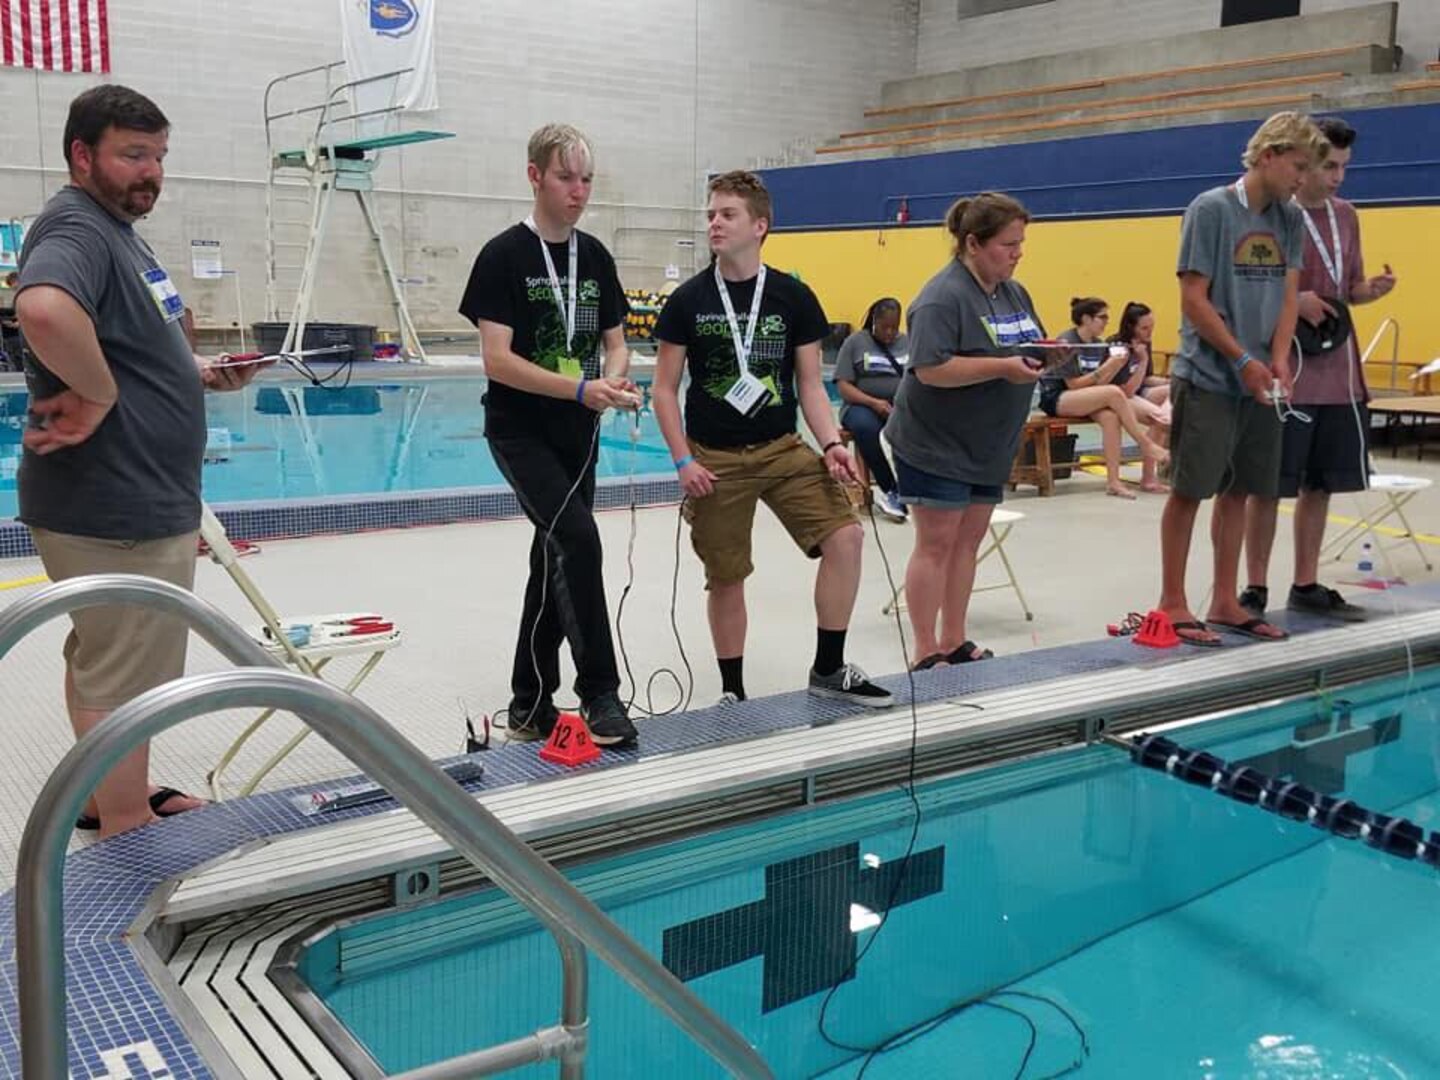 CRANE, Ind. - Students from Indiana elementary, middle and high schools competed at the International SeaPerch Challenge at the University of Massachusetts in Dartmouth.